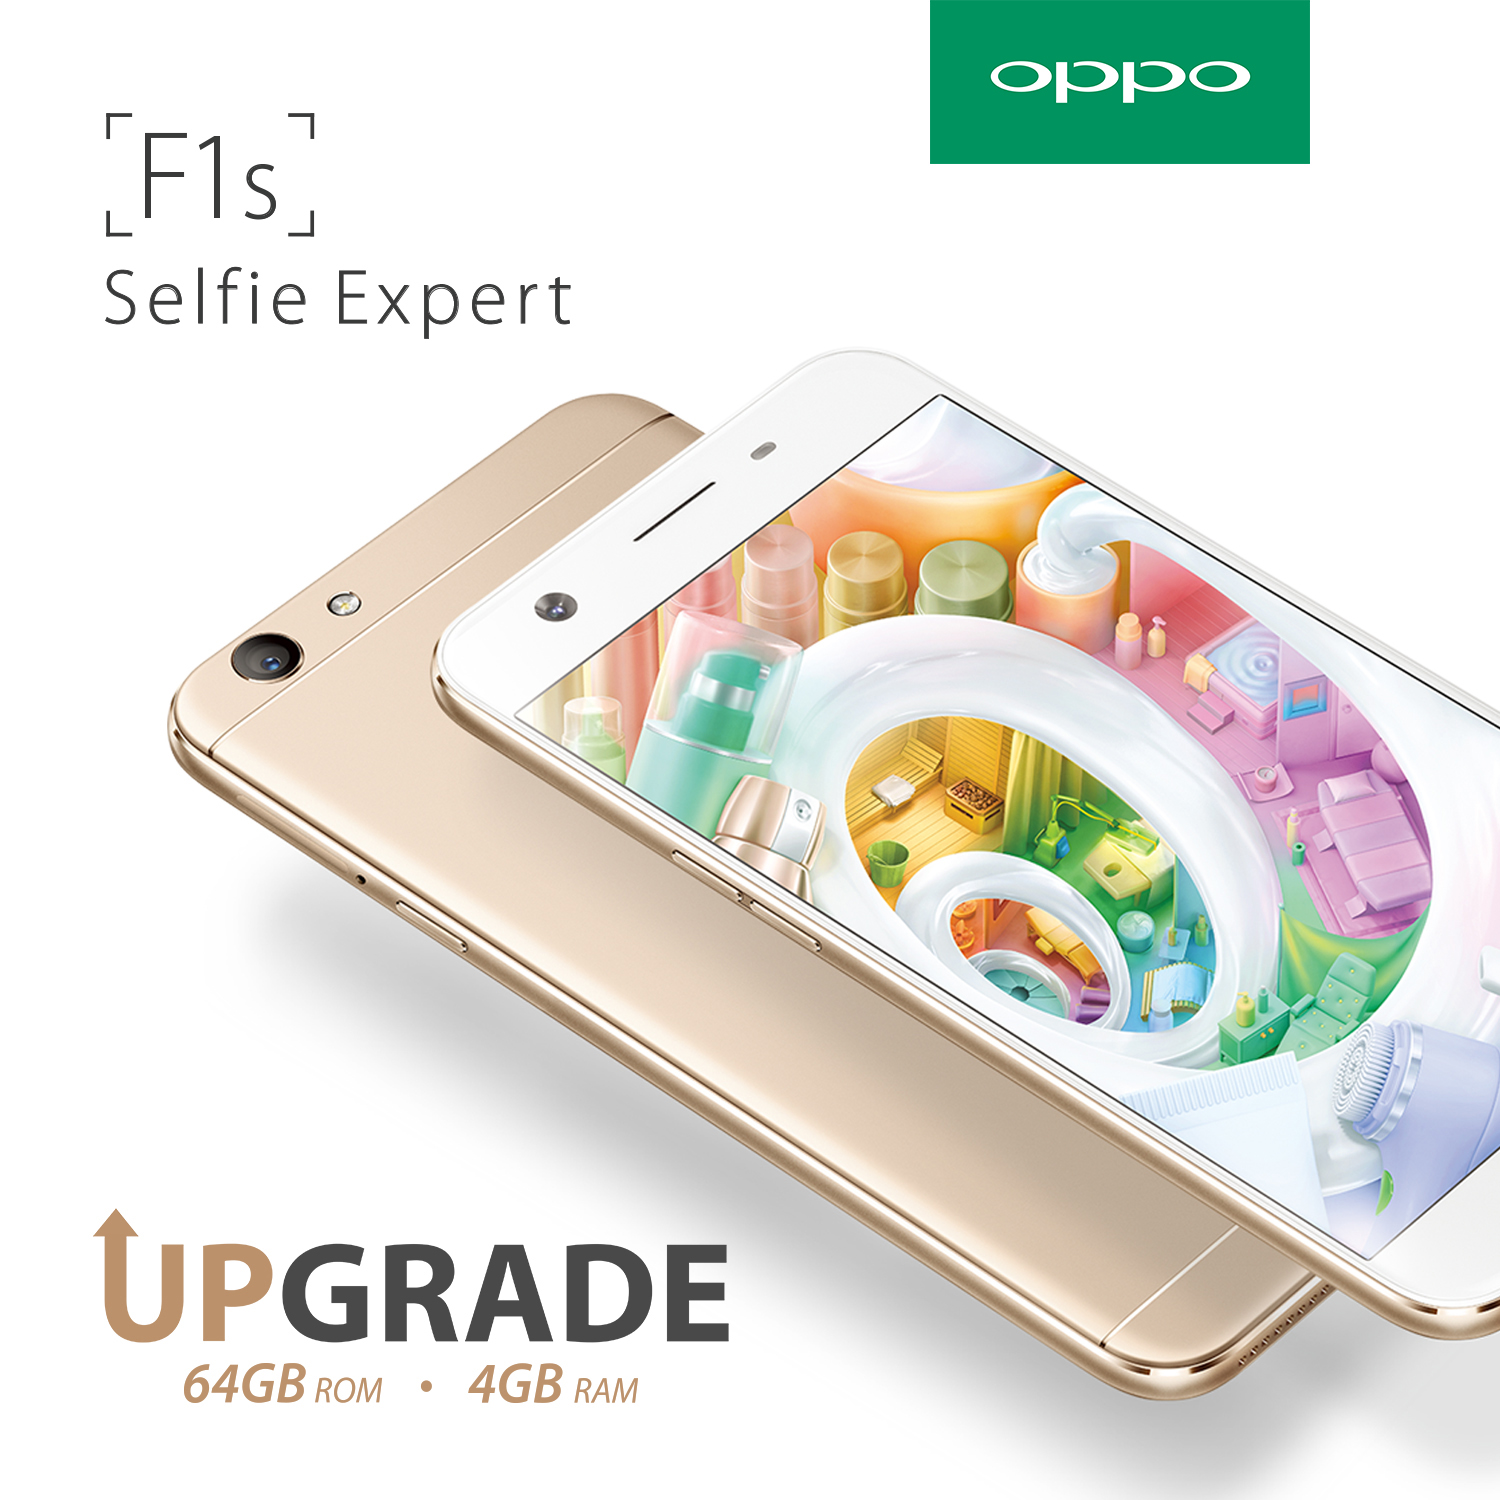 Upgraded OPPO F1s With 64GB of Storage and 4GB of RAM Will Be Available in PH Starting Feb. 3!